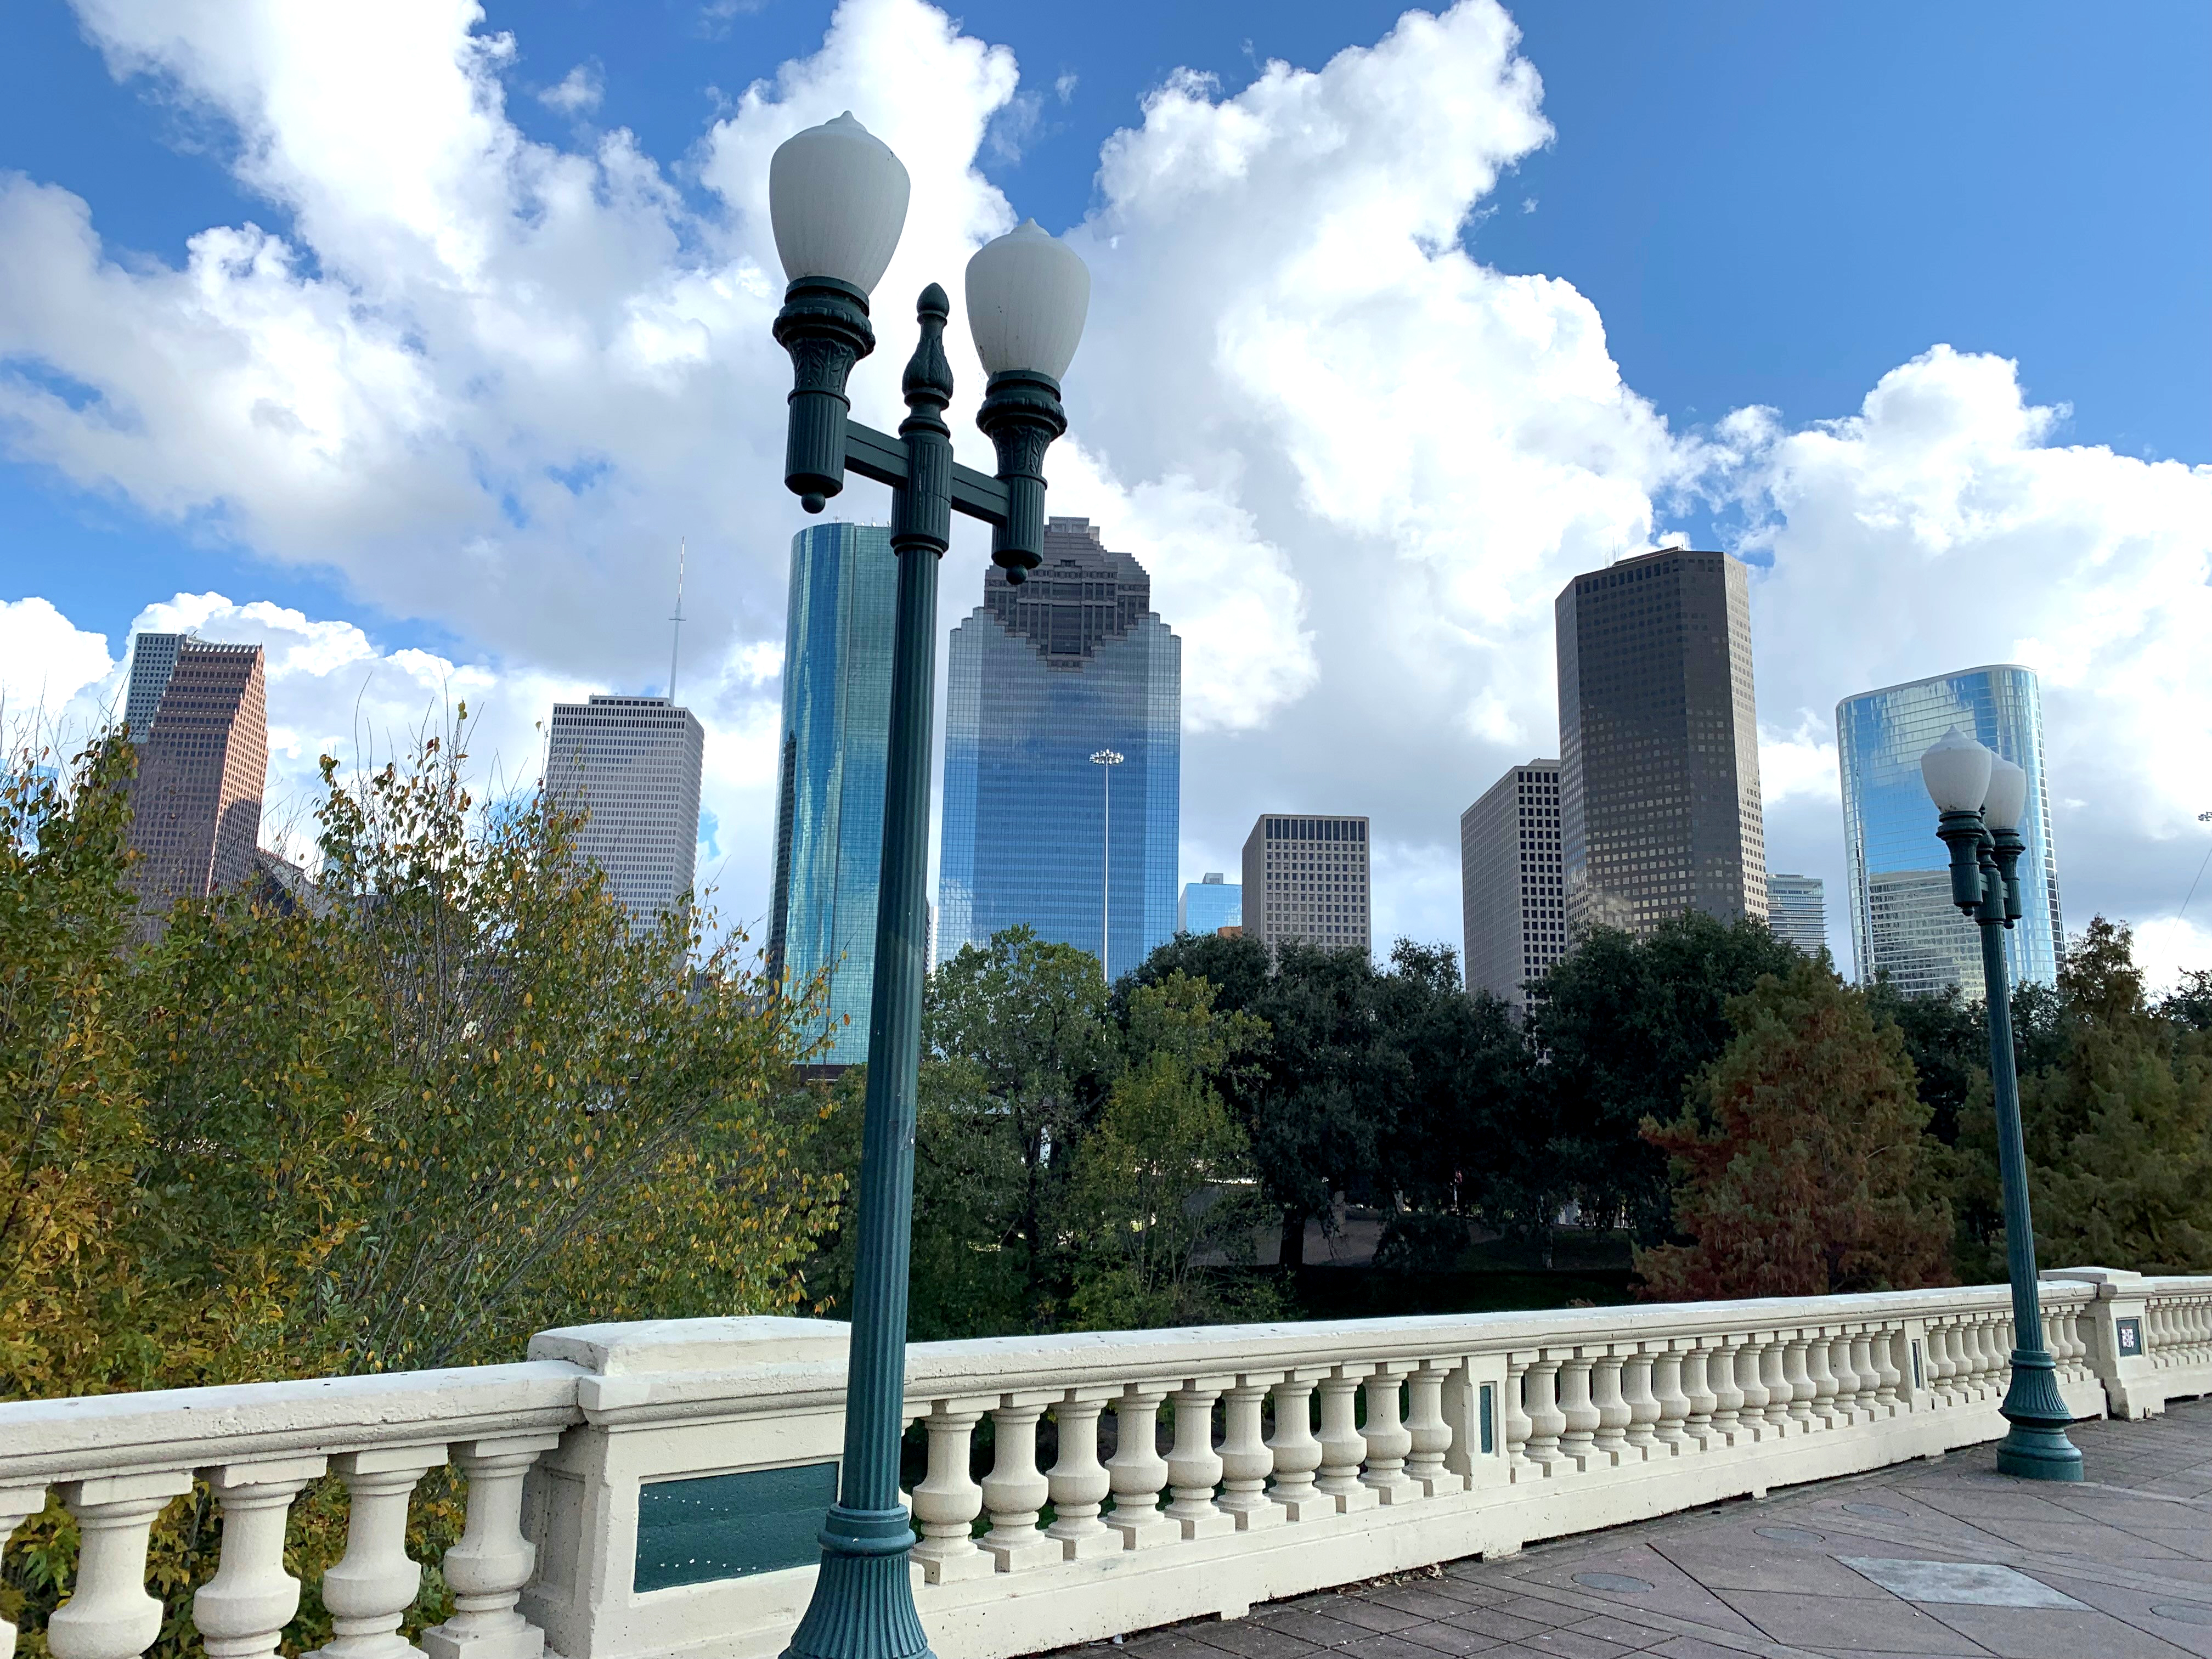 Looking at downtown Houston from the Sabine Bridge